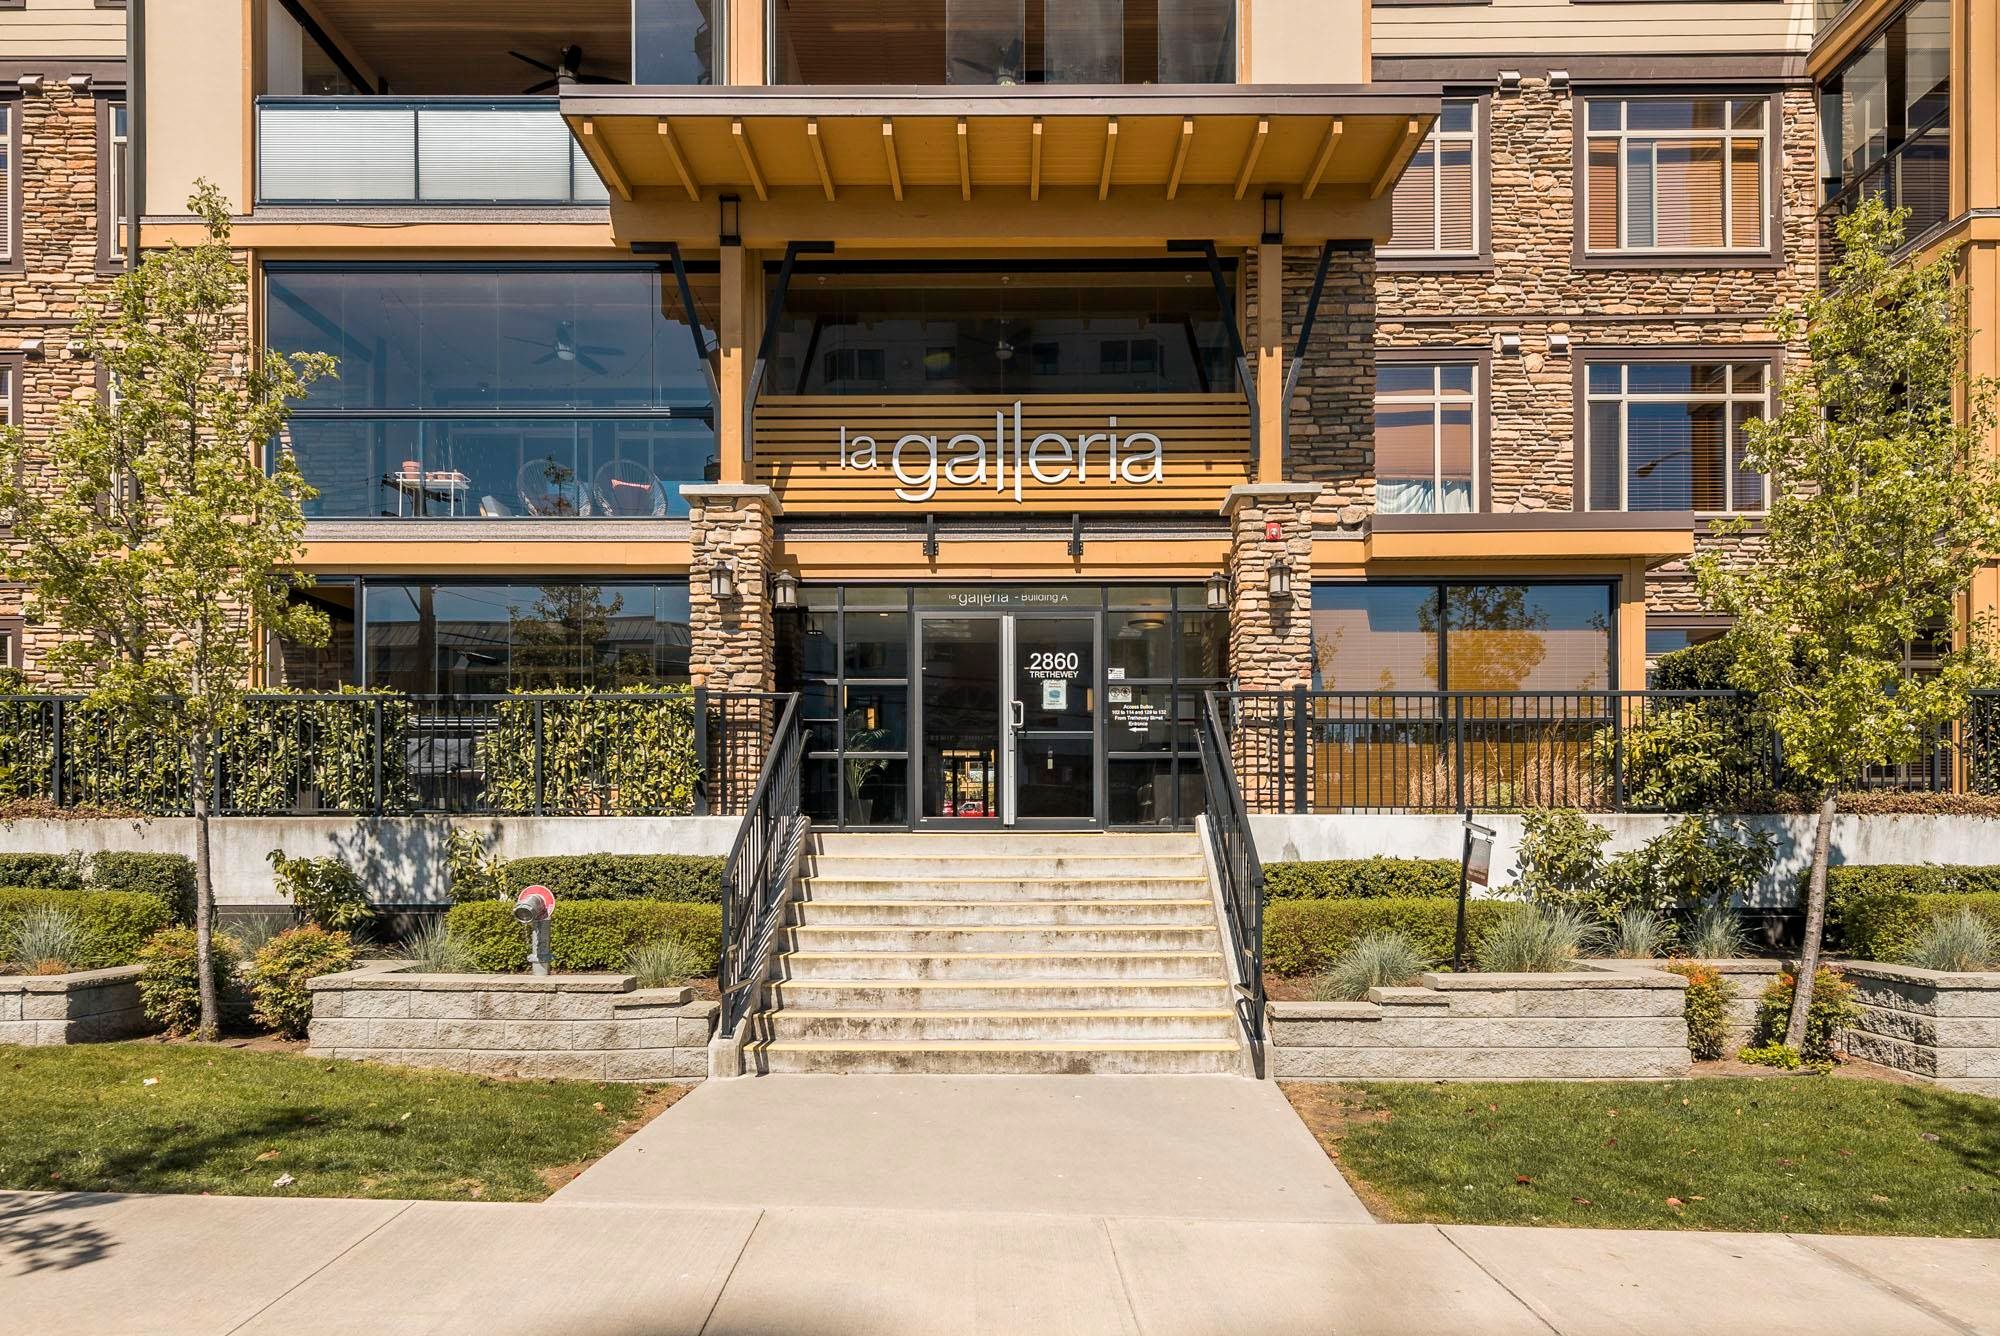 Open House. Open House on Sunday, August 28, 2022 1:00PM - 4:00PM
Upscale 1 Bedroom and Den condo with 968 sq ft of living area at La Galleria in Abbotsford. Solarium plus a private gated patio with walkout to a treed courtyard. Great location close to al